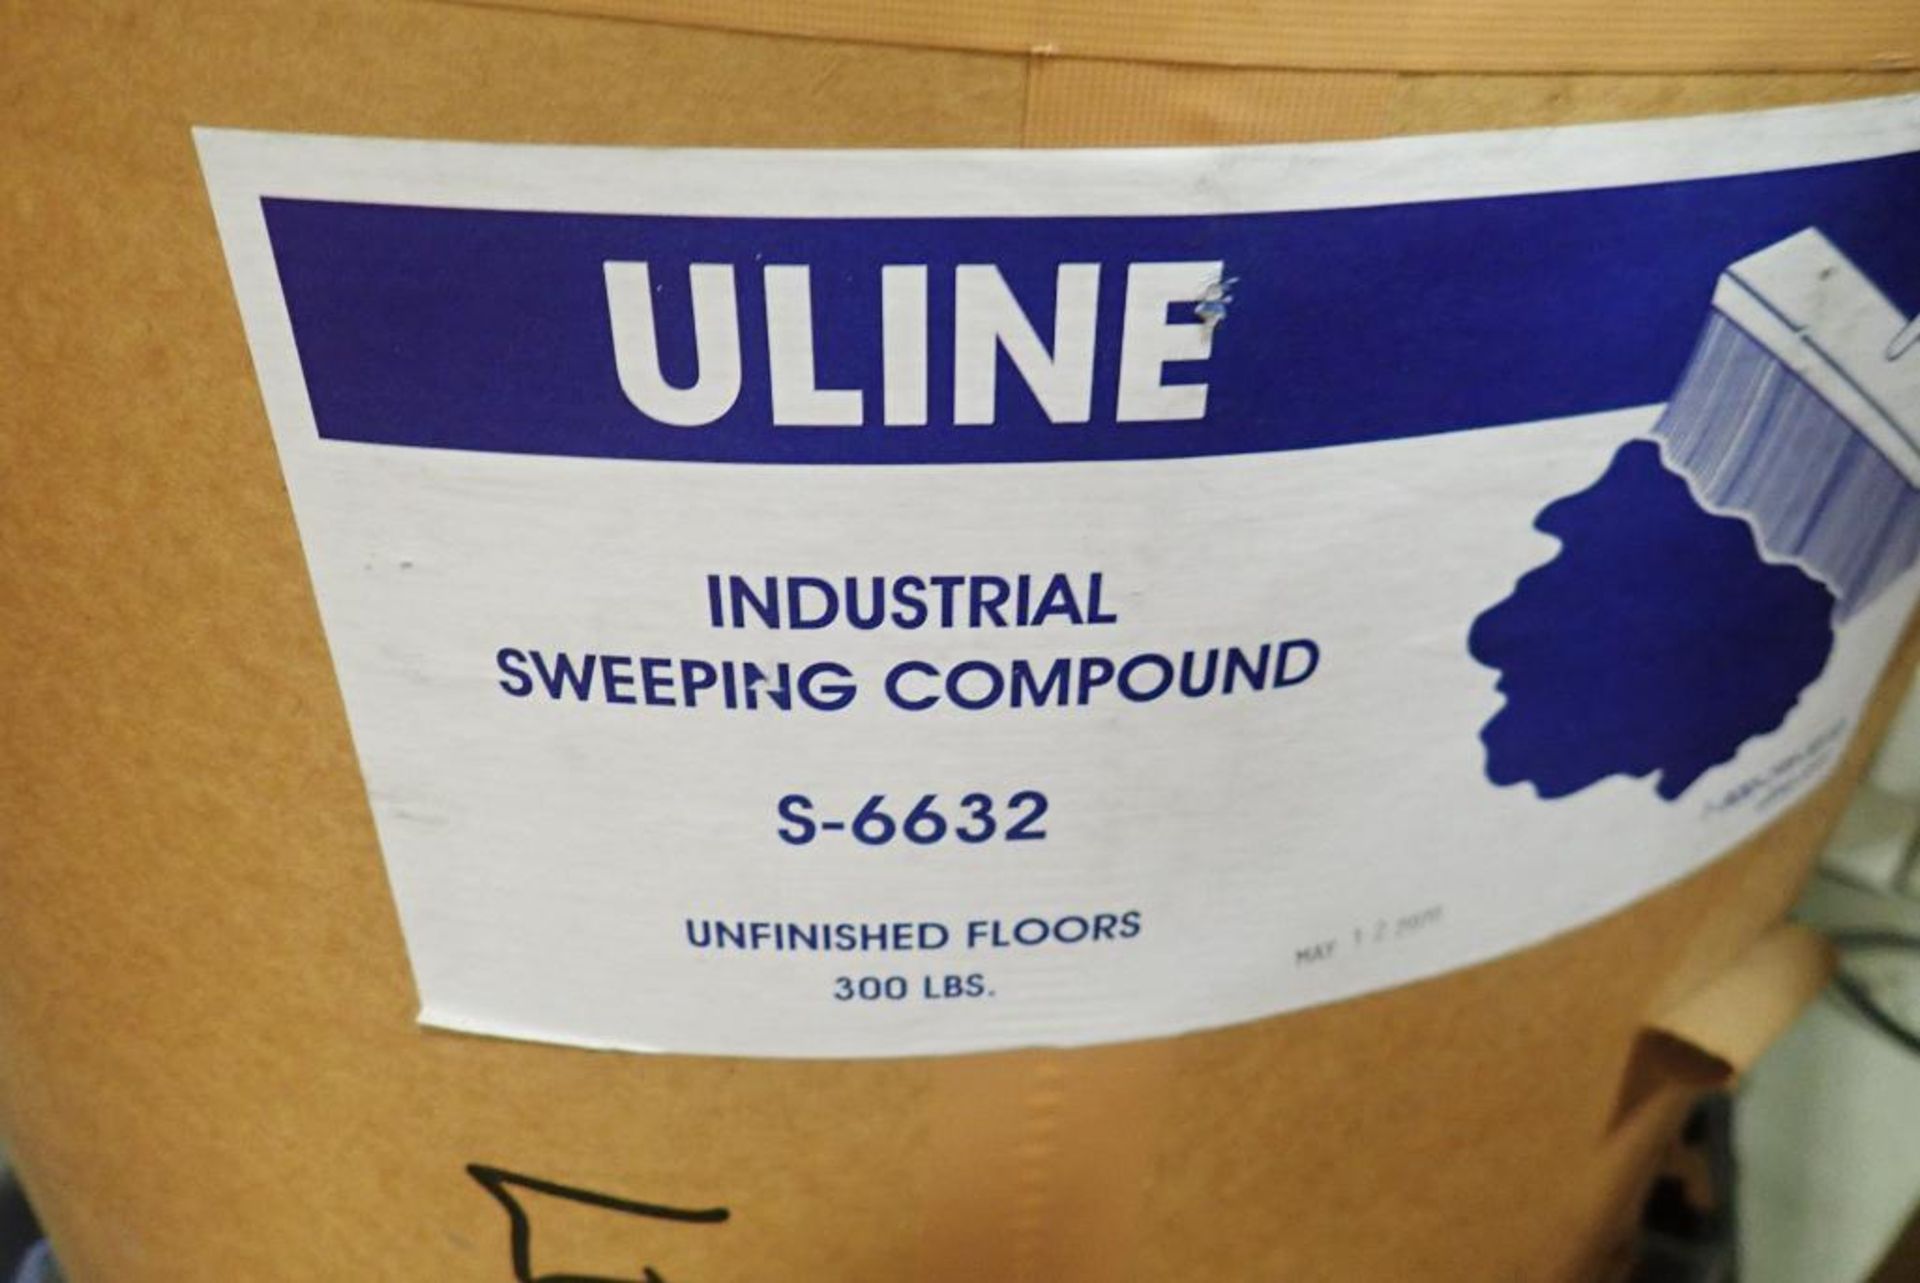 Lot of 1 and 1/3 Barrels Uline Industrial Sweeping Compound. - Image 2 of 2